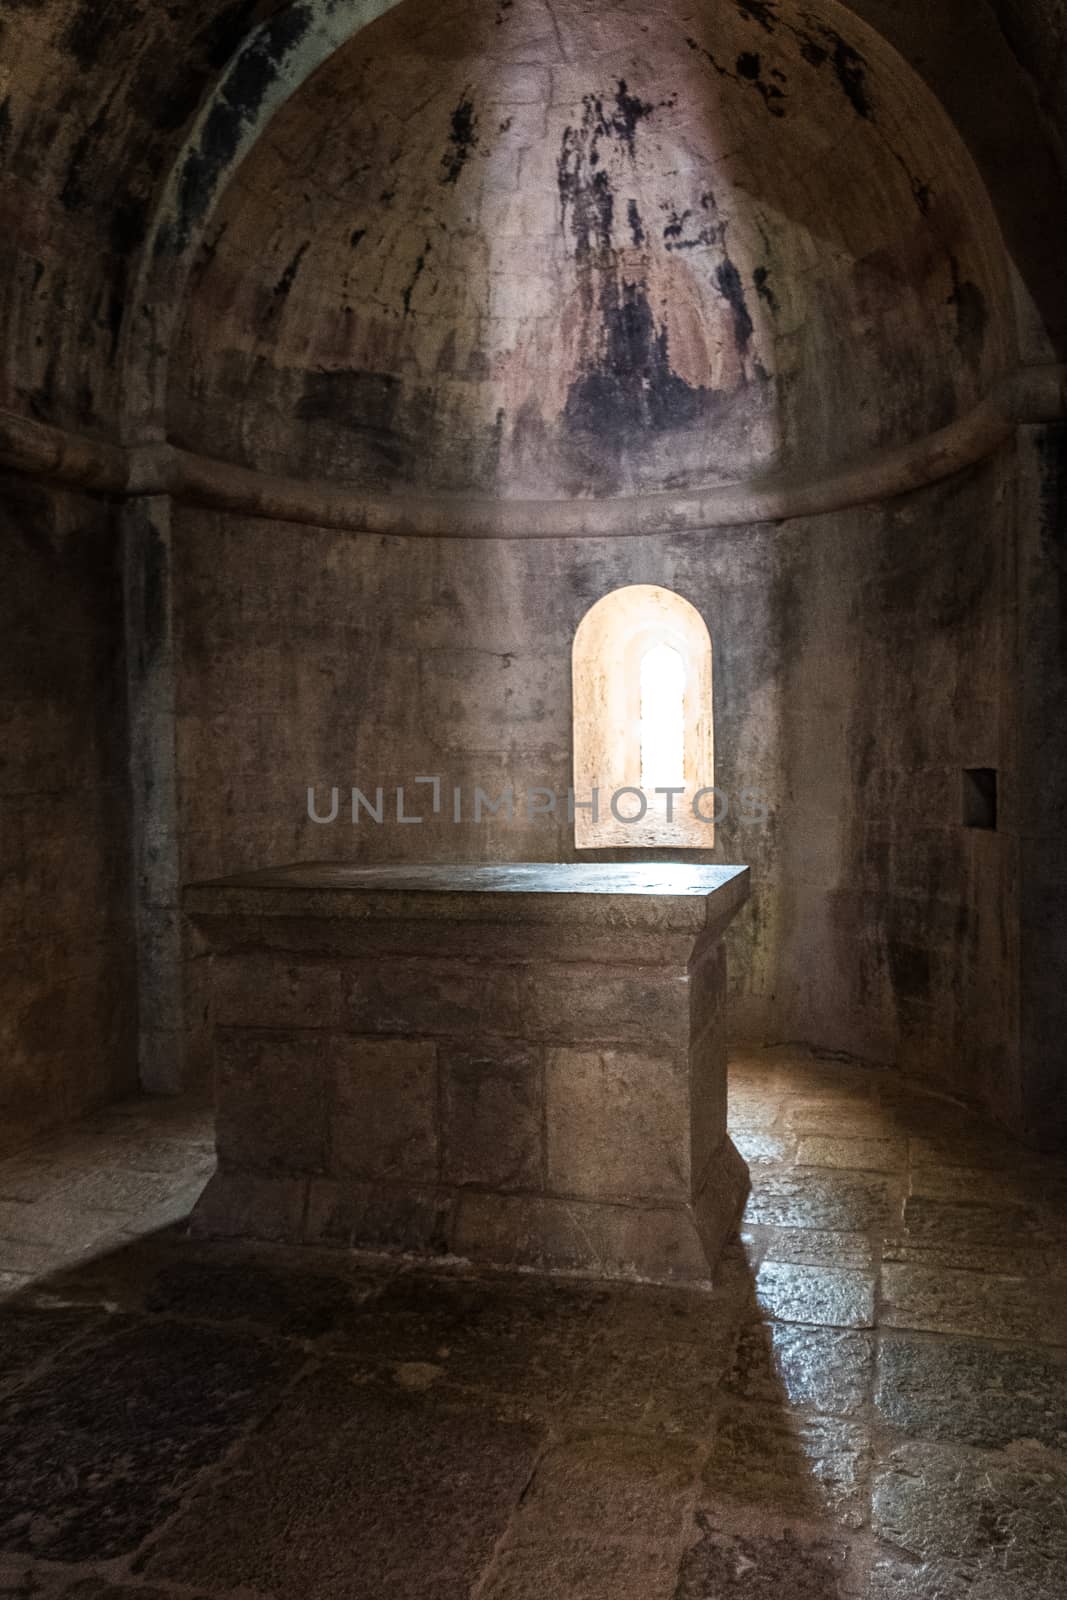 Altar of the Thonoret abbey in the Var in France by raphtong